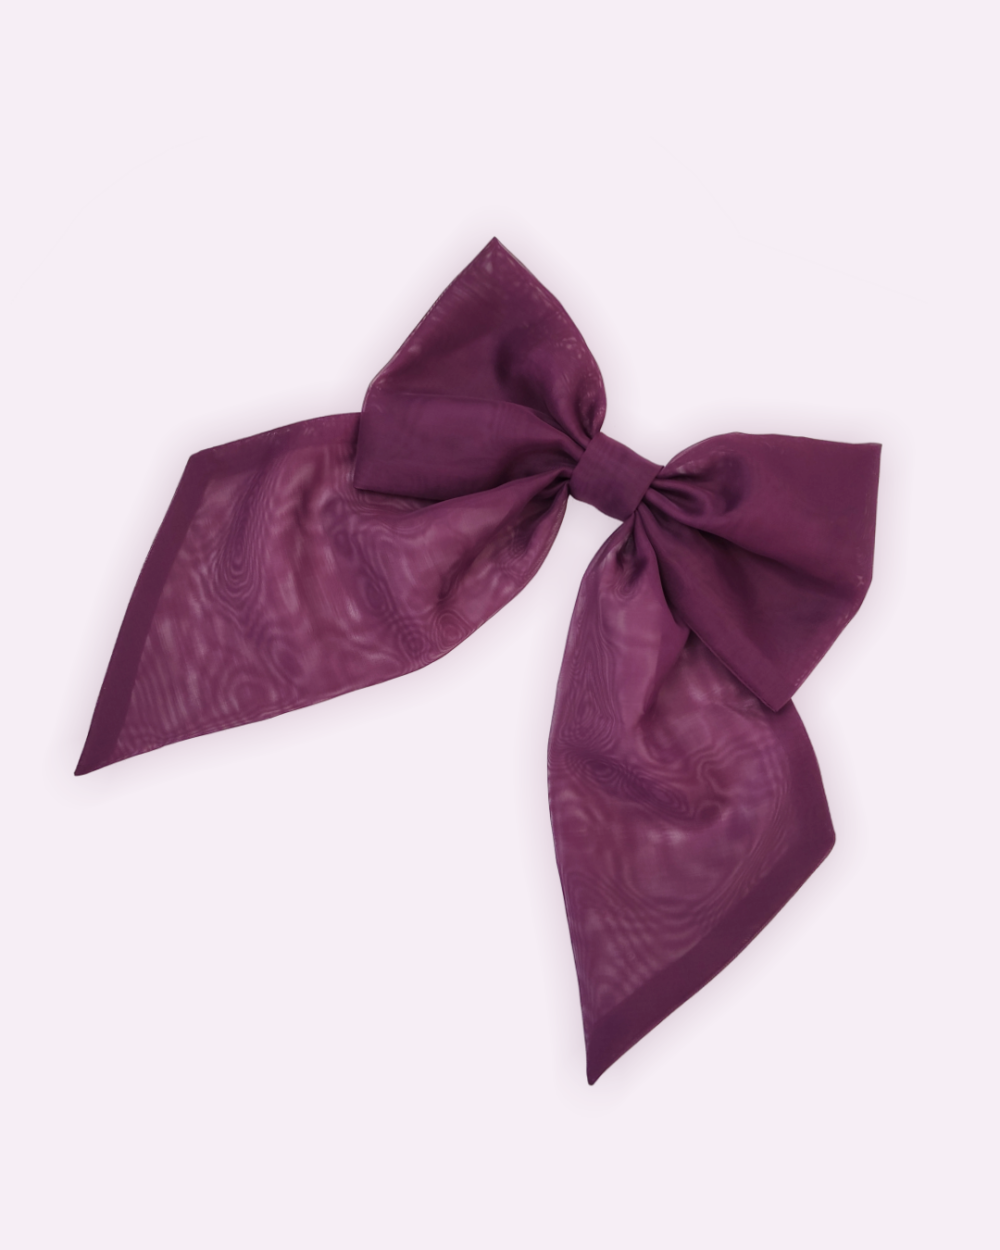 Plum brooch in the shape of a giant bow made of voile by melikestea.